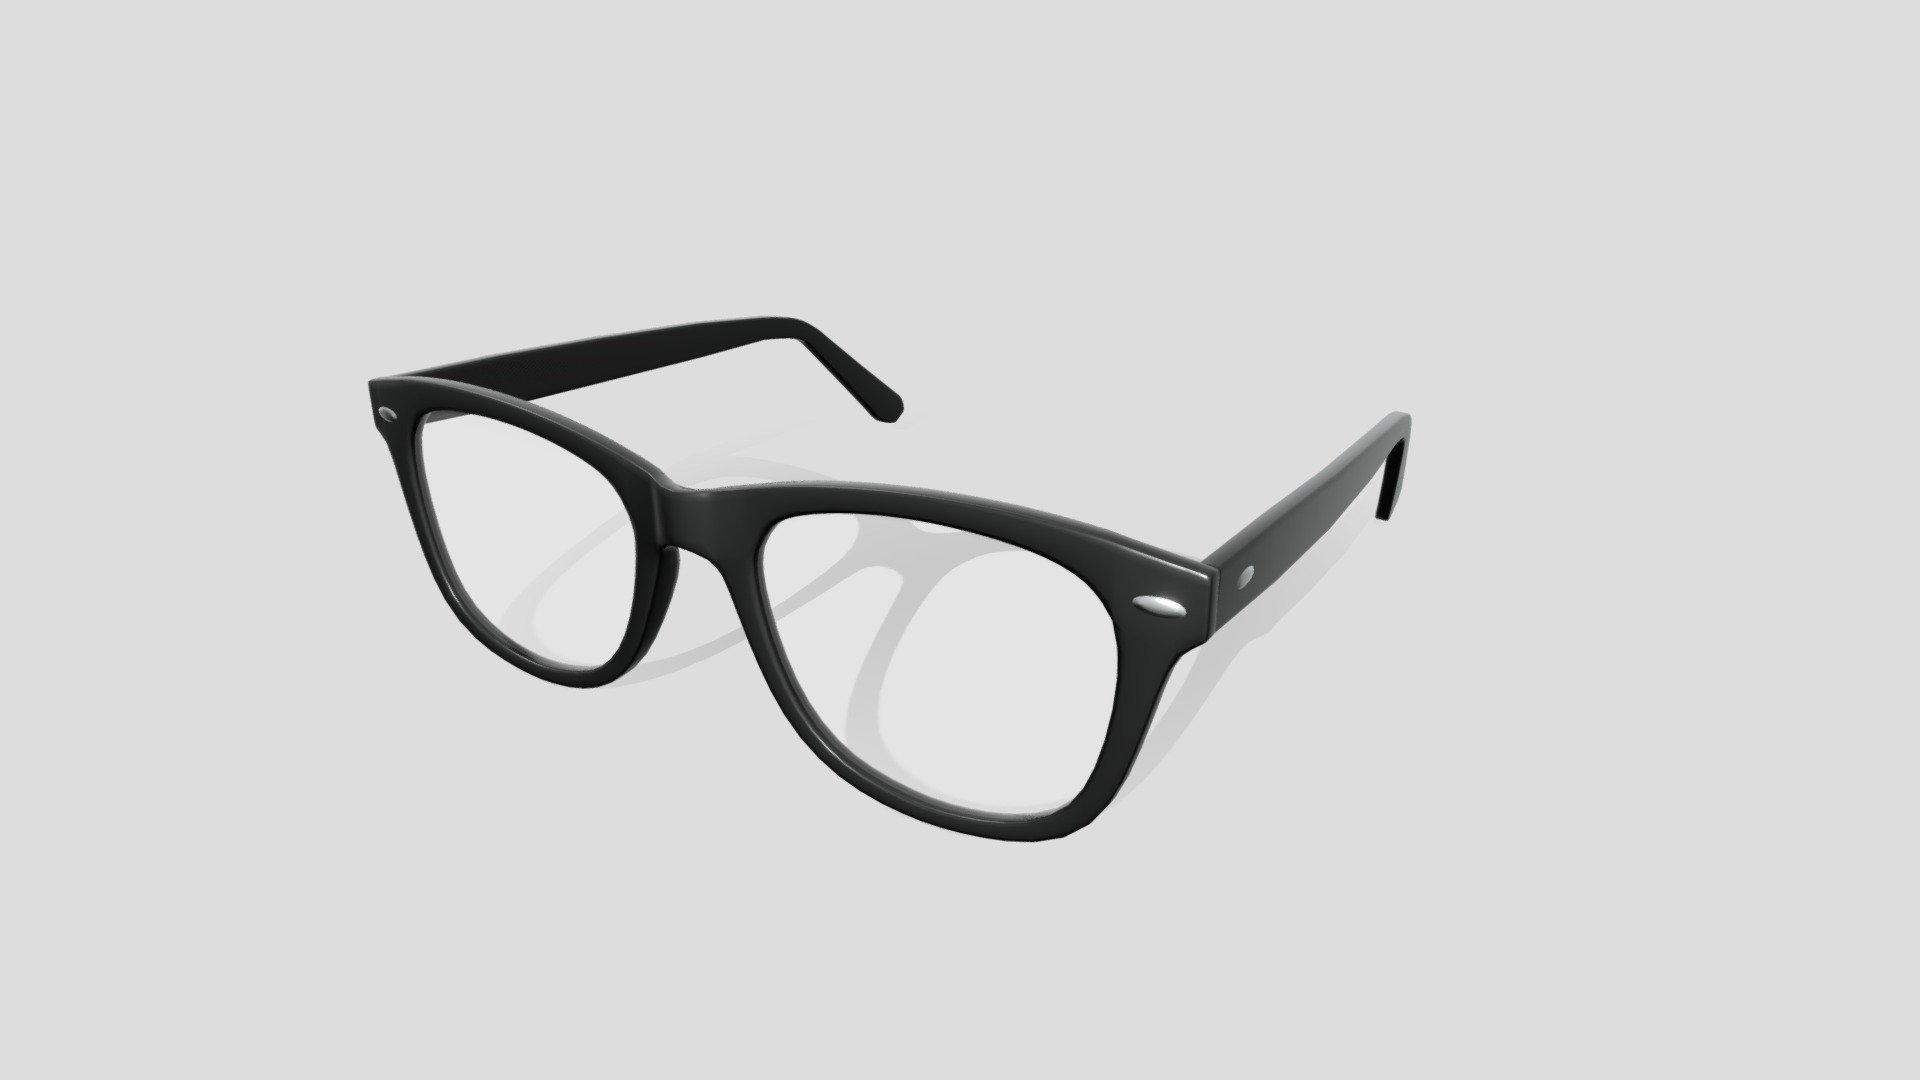 Glasses. Modelled to real world dimensions:  frame width 145 mm, frame height  47 mm, arm length 139 mm. Made with Blender 3.6 3d model